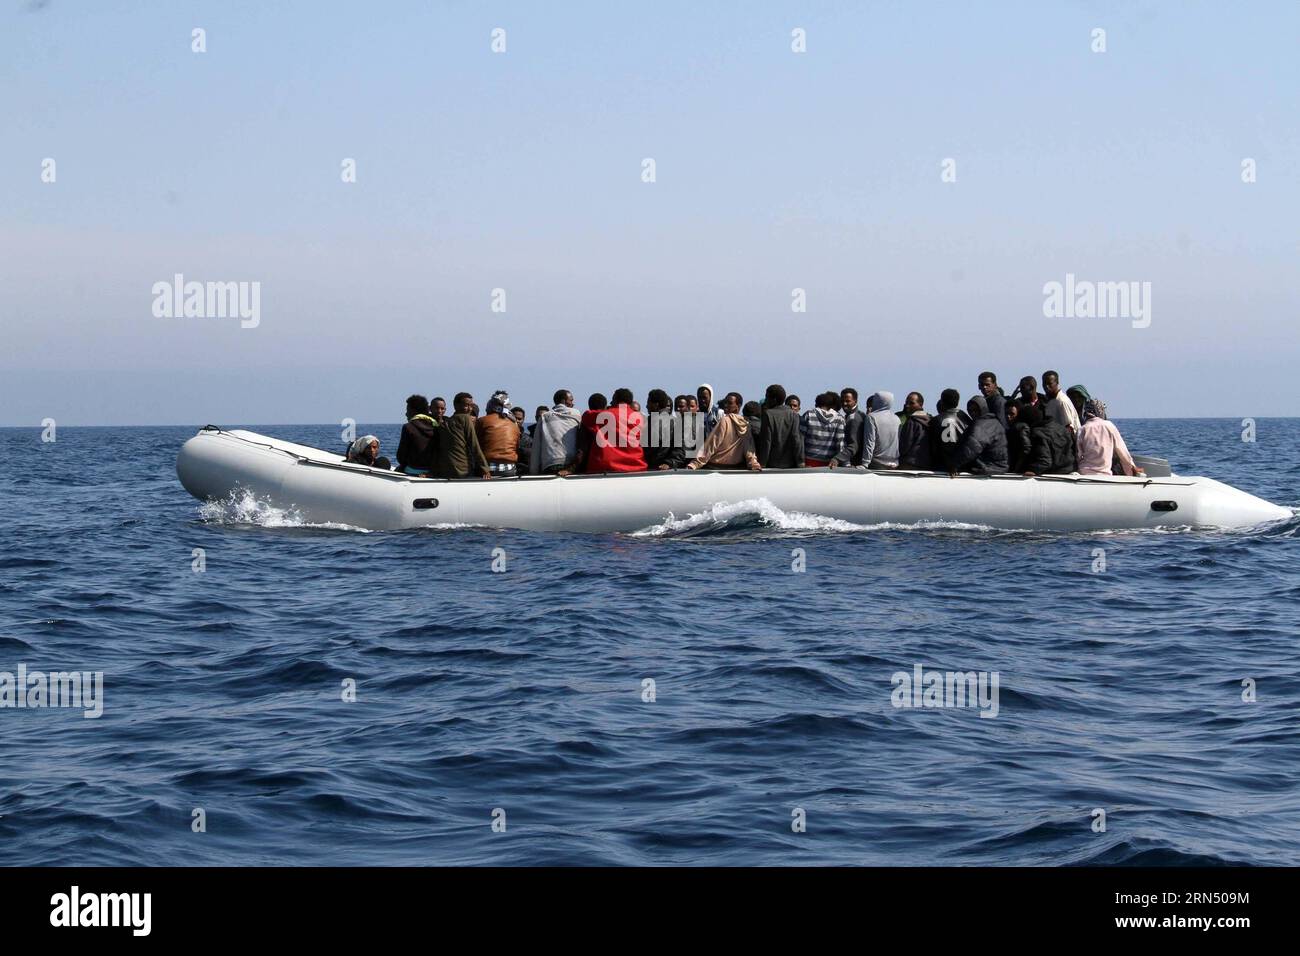 (150606) -- TRIPOLI, June 6 -- A batch of illegal immigrants sit on a boat of the Libyan coast guard near Garabulli, Libya on June 6, 2015. The Libyan coast guard intercepted dozens of sub-Saharan nationals trying to stow away to Europe from Libyan coast. ) LIBYA-GARABULLI-ILLEGAL IMMIGRANTS HamzaxTurkia PUBLICATIONxNOTxINxCHN   Tripoli June 6 a Batch of illegal Immigrants Sit ON a Boat of The Libyan Coast Guard Near GARABULLI Libya ON June 6 2015 The Libyan Coast Guard intercepted Dozens of Sub Saharan Nationals trying to stow Away to Europe from Libyan Coast Libya GARABULLI illegal Immigrant Stock Photo